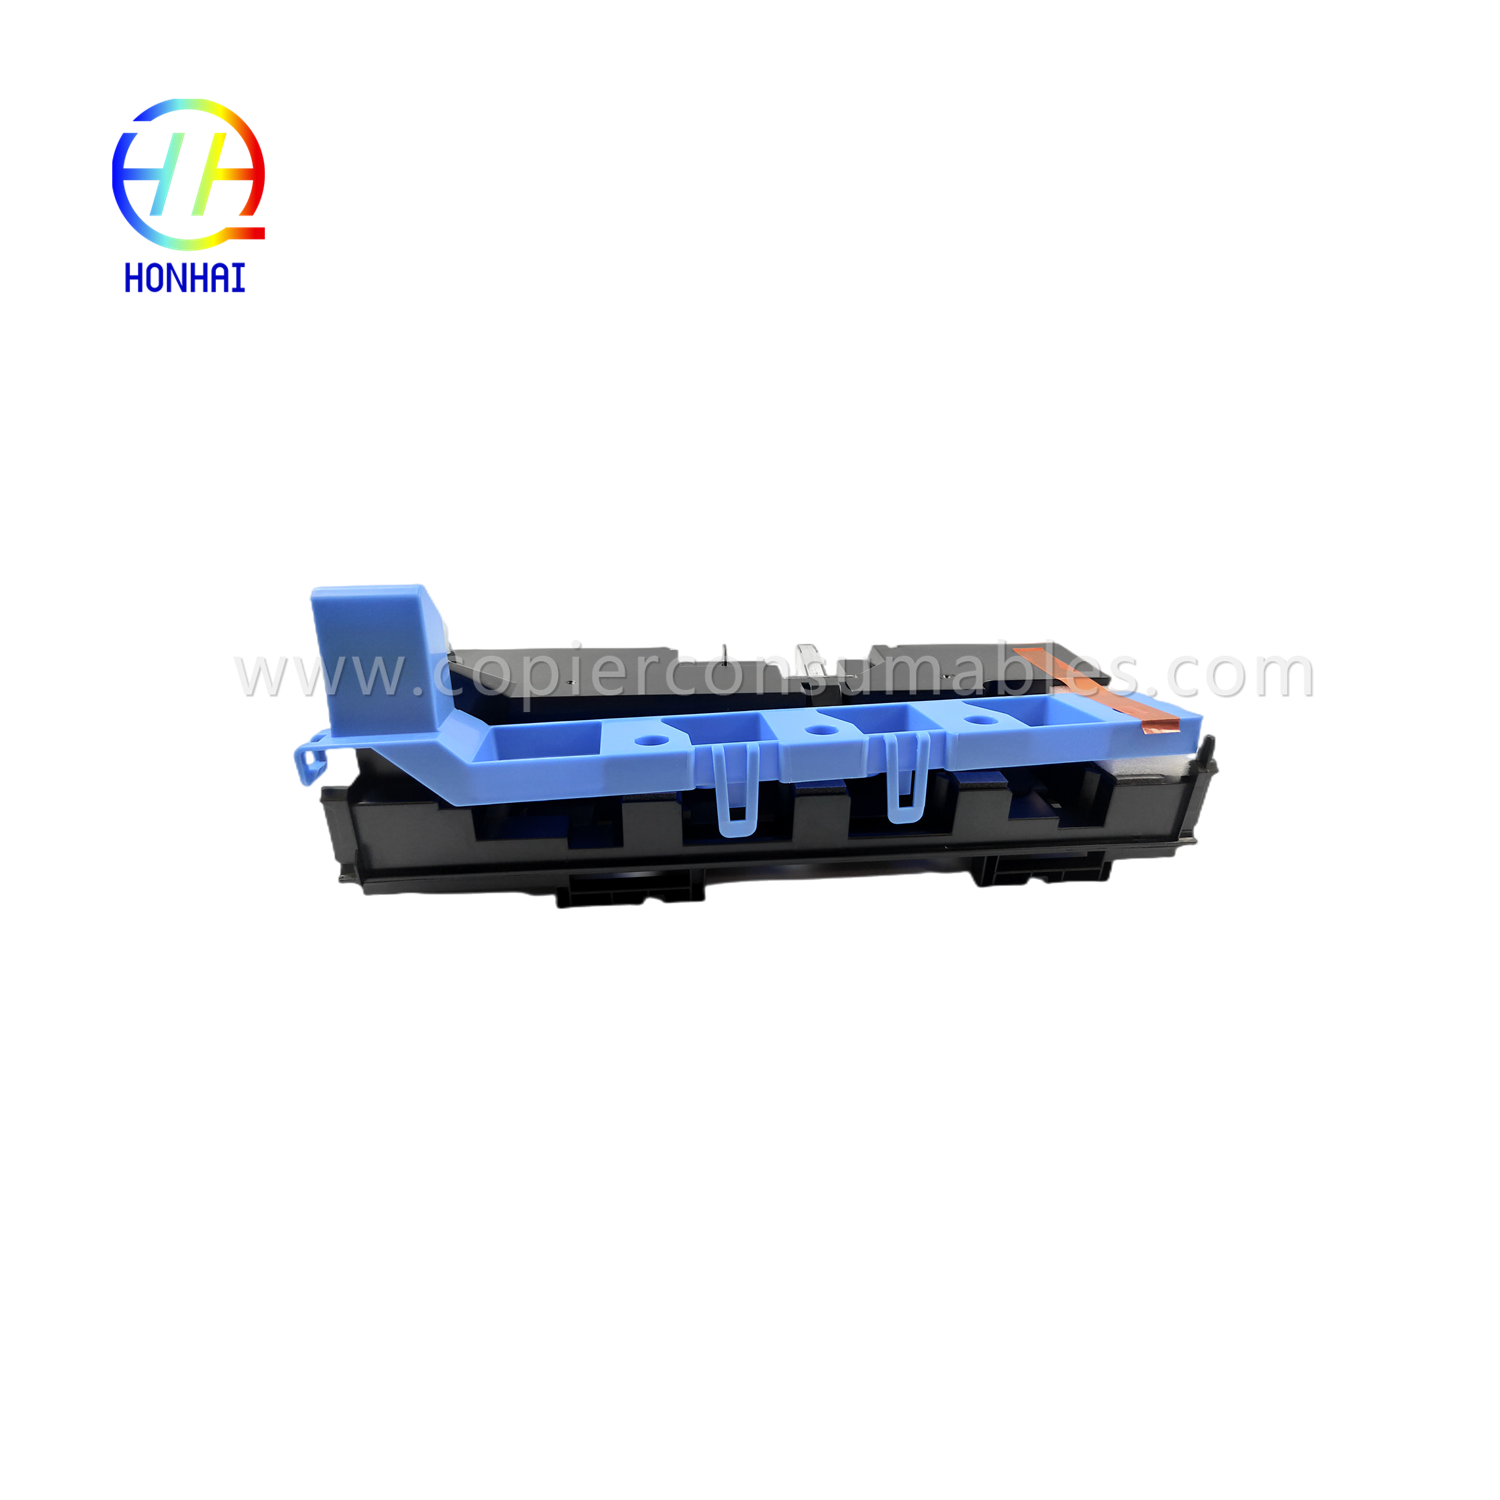 https://c585.goodo.net/waste-toner-container-for-konica-minolta-bizhub-c226-c256-c266-c227-c287-c367-c7333-c7226-c7528-wx-105-a8j-jwy1 ngwaahịa toner-box-product/